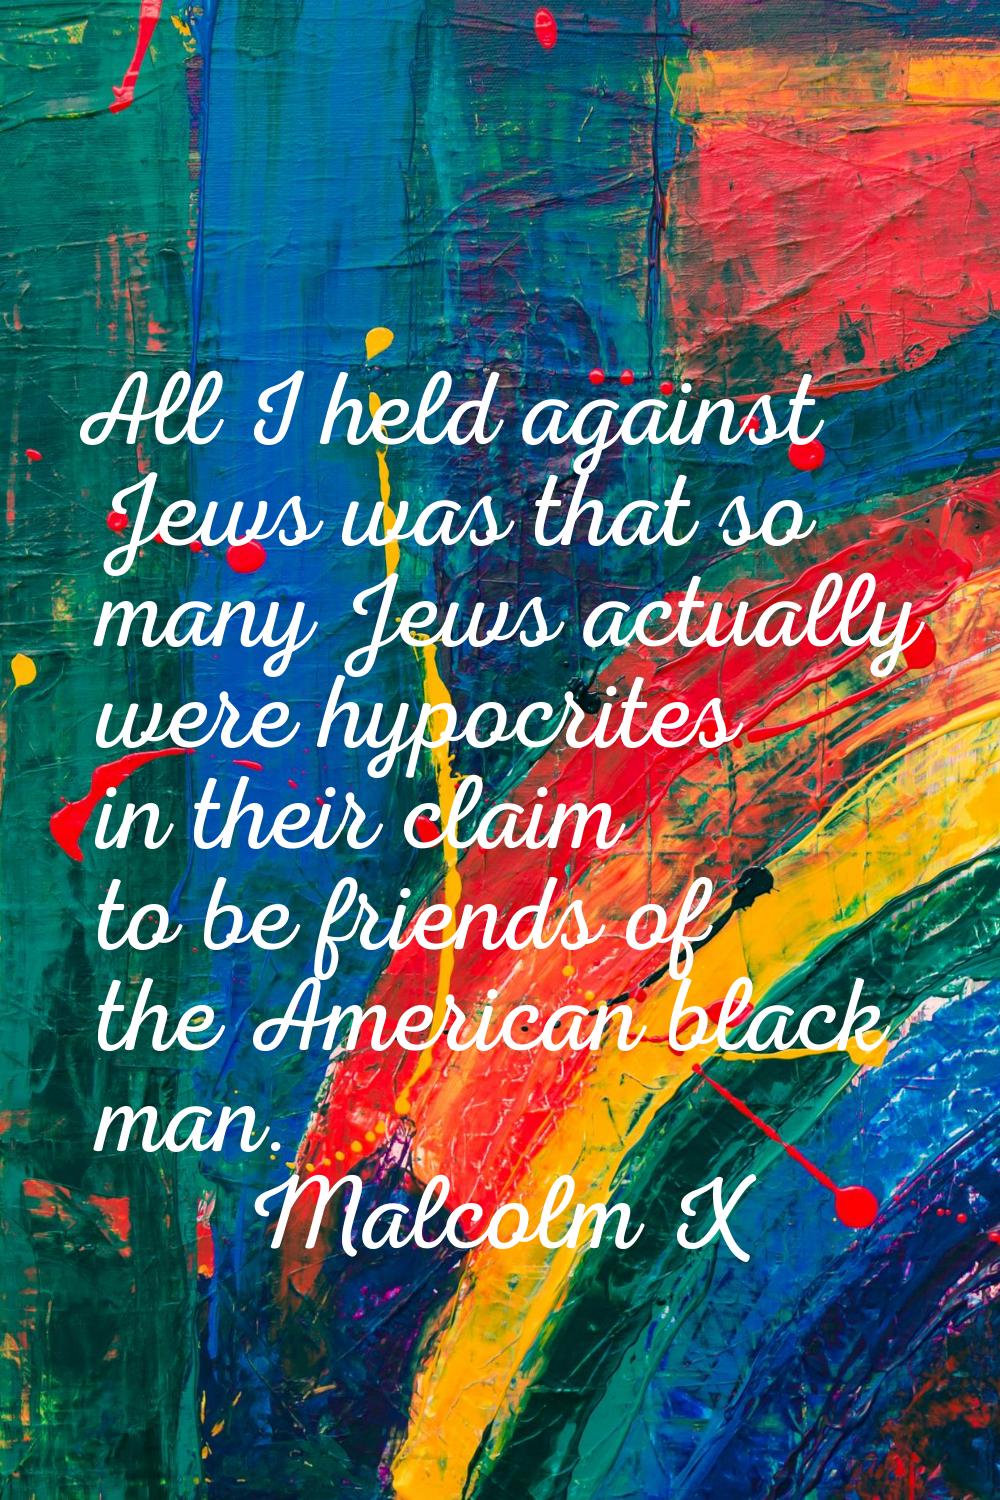 All I held against Jews was that so many Jews actually were hypocrites in their claim to be friends